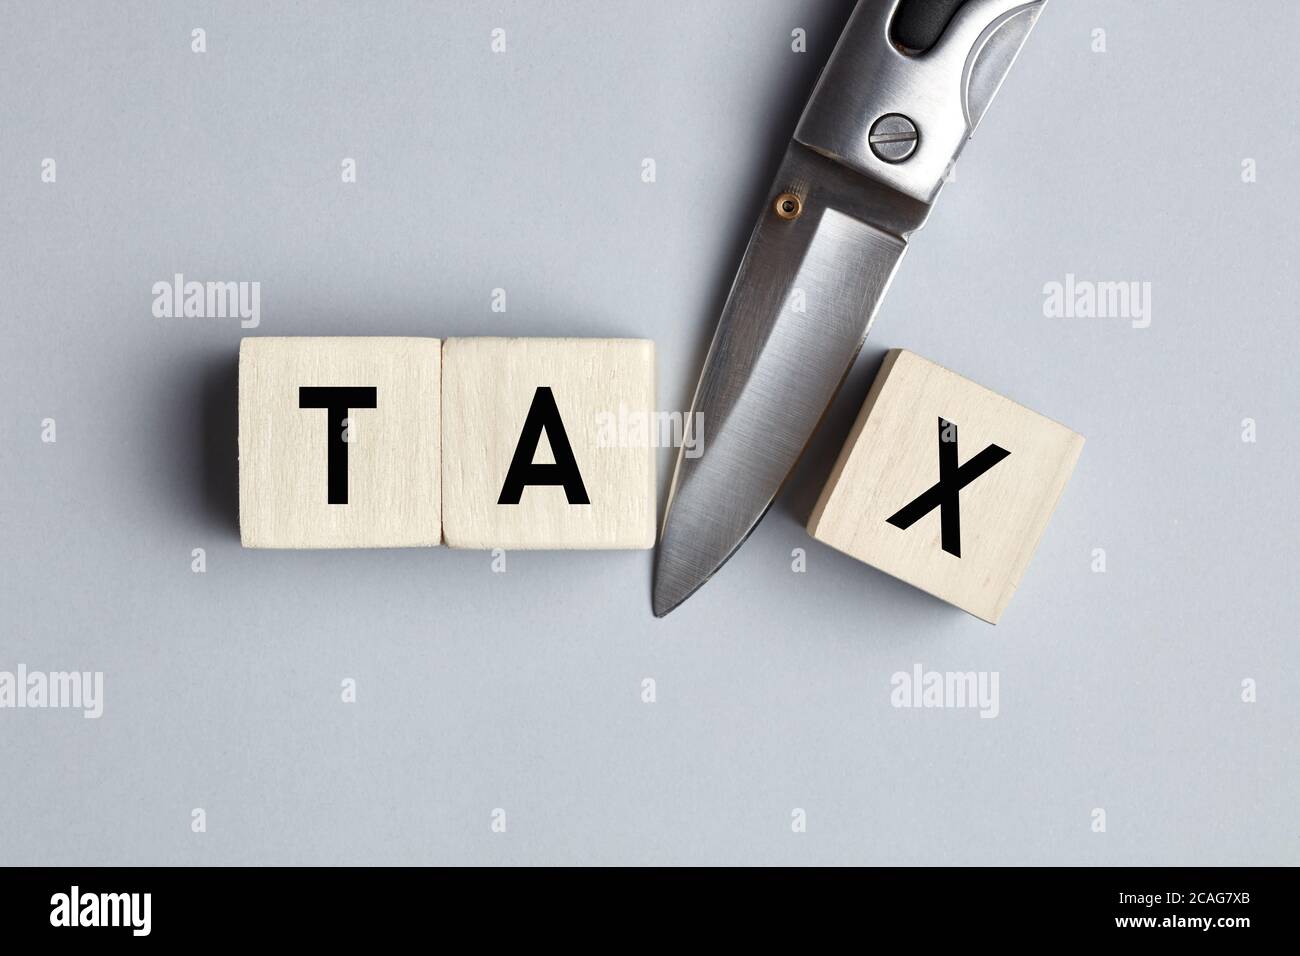 The word tax cut written on wooden cubes with a knife. Tax cut, reduction or deduction concept. Stock Photo